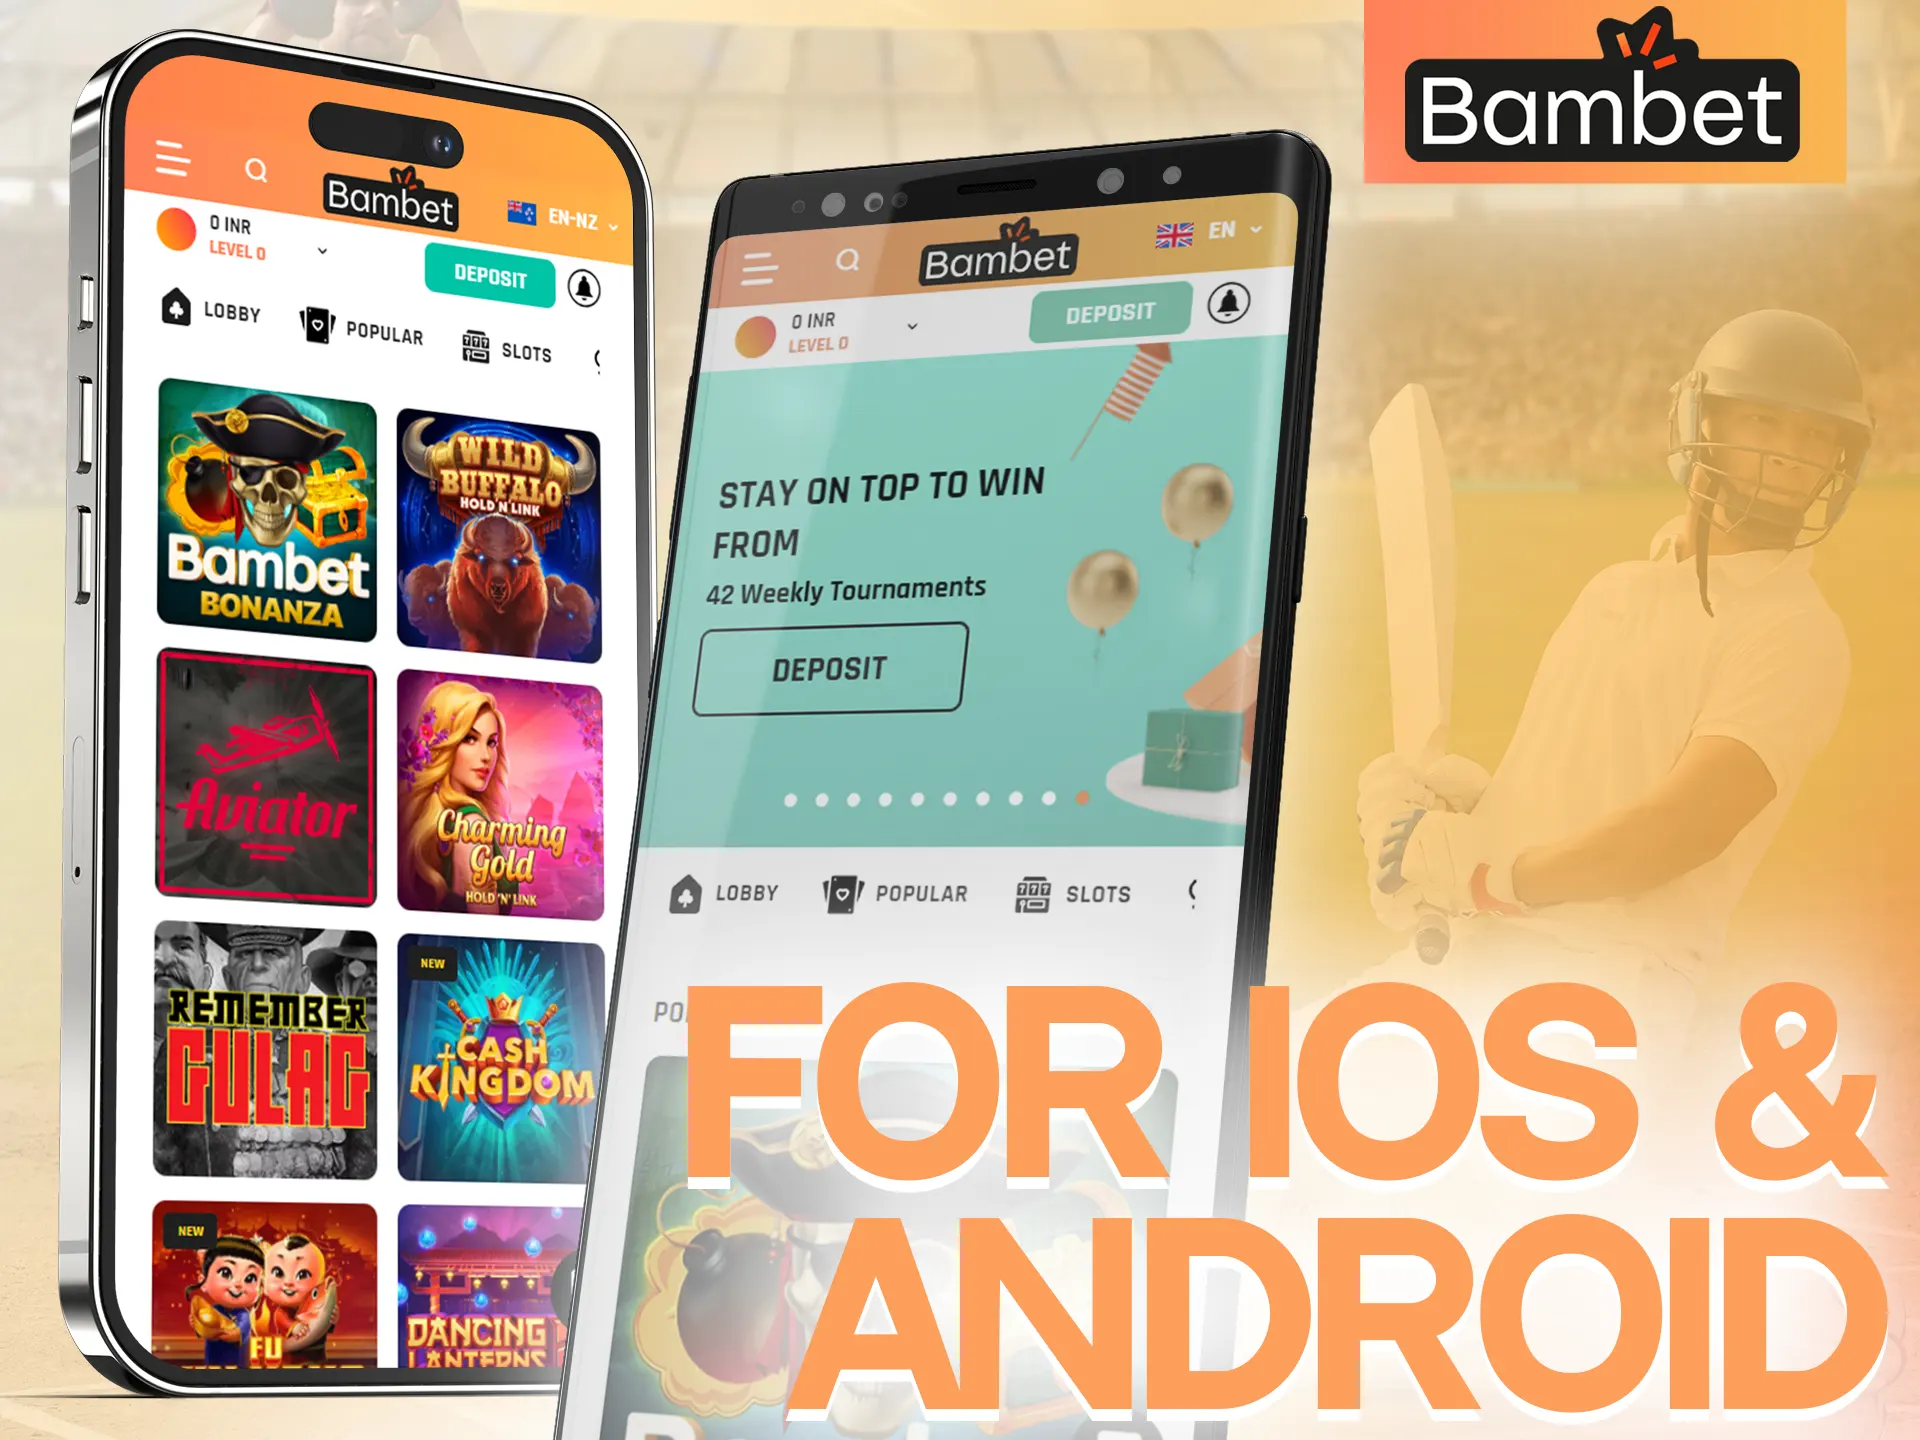 Bambet has a handy app for your Android or iOS phone.